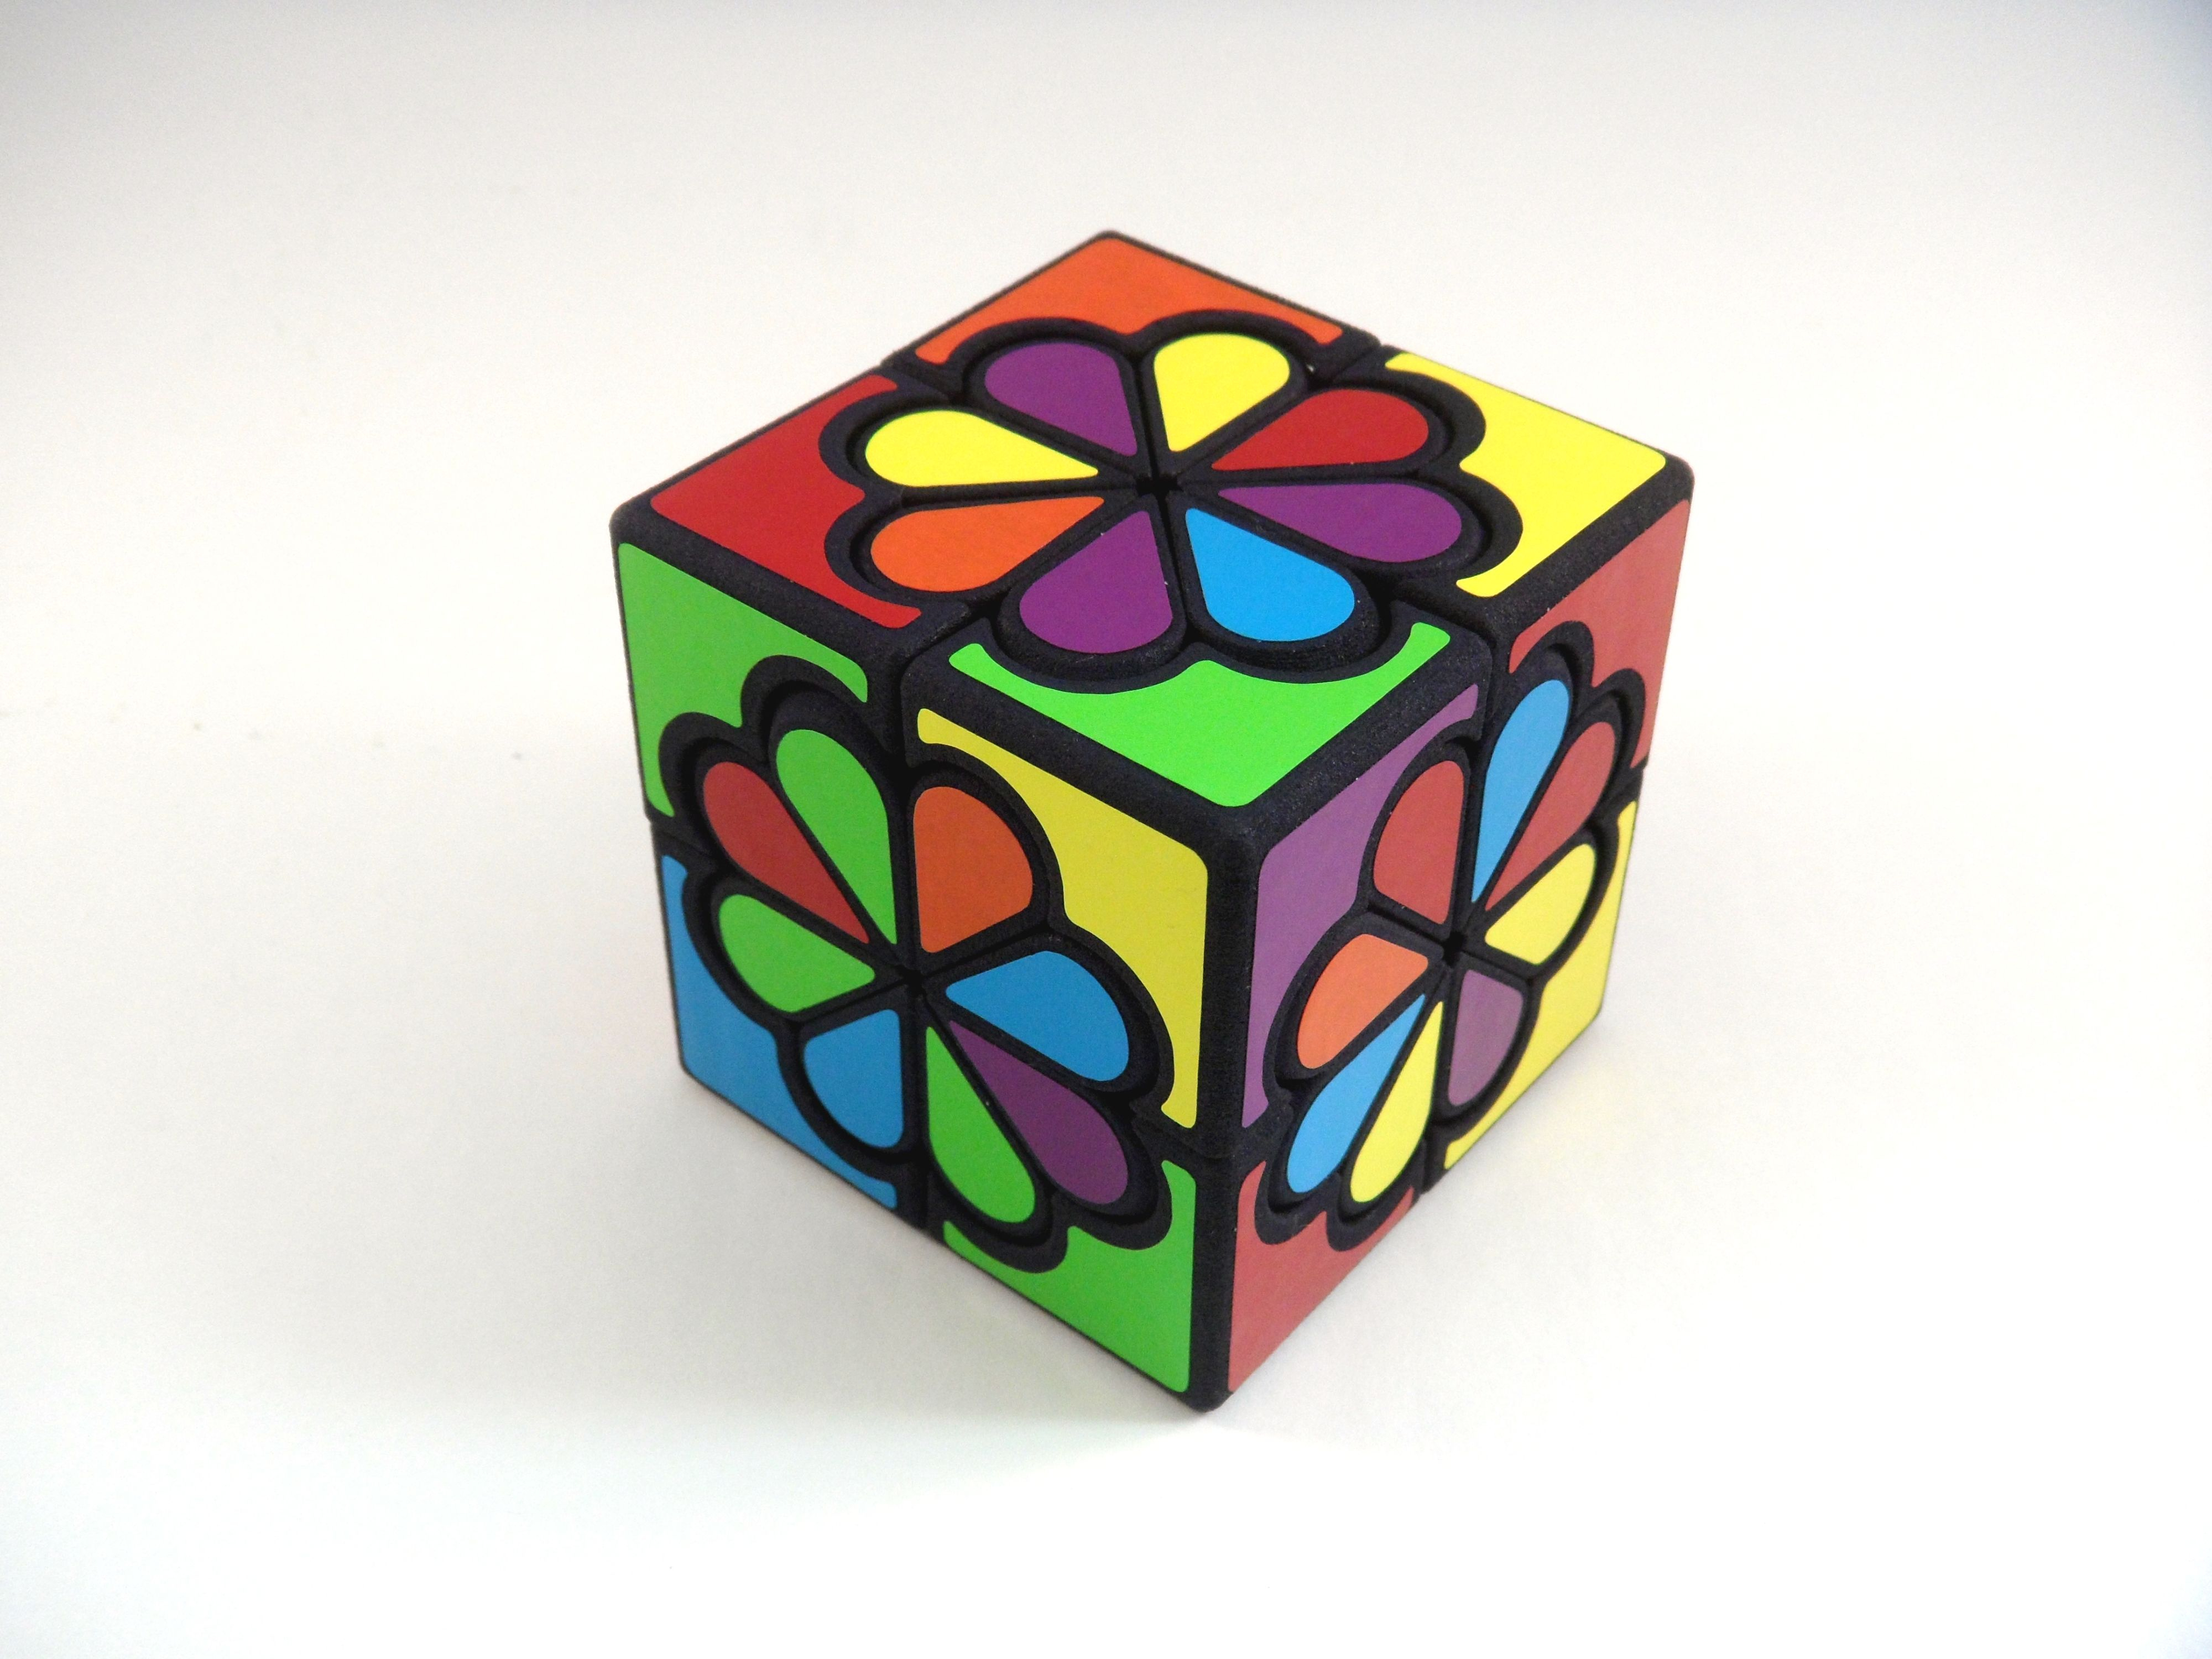 3D Printing Puzzles In Polyamide | 3D Printing Blog | I.materialise - 3D Printable Puzzles